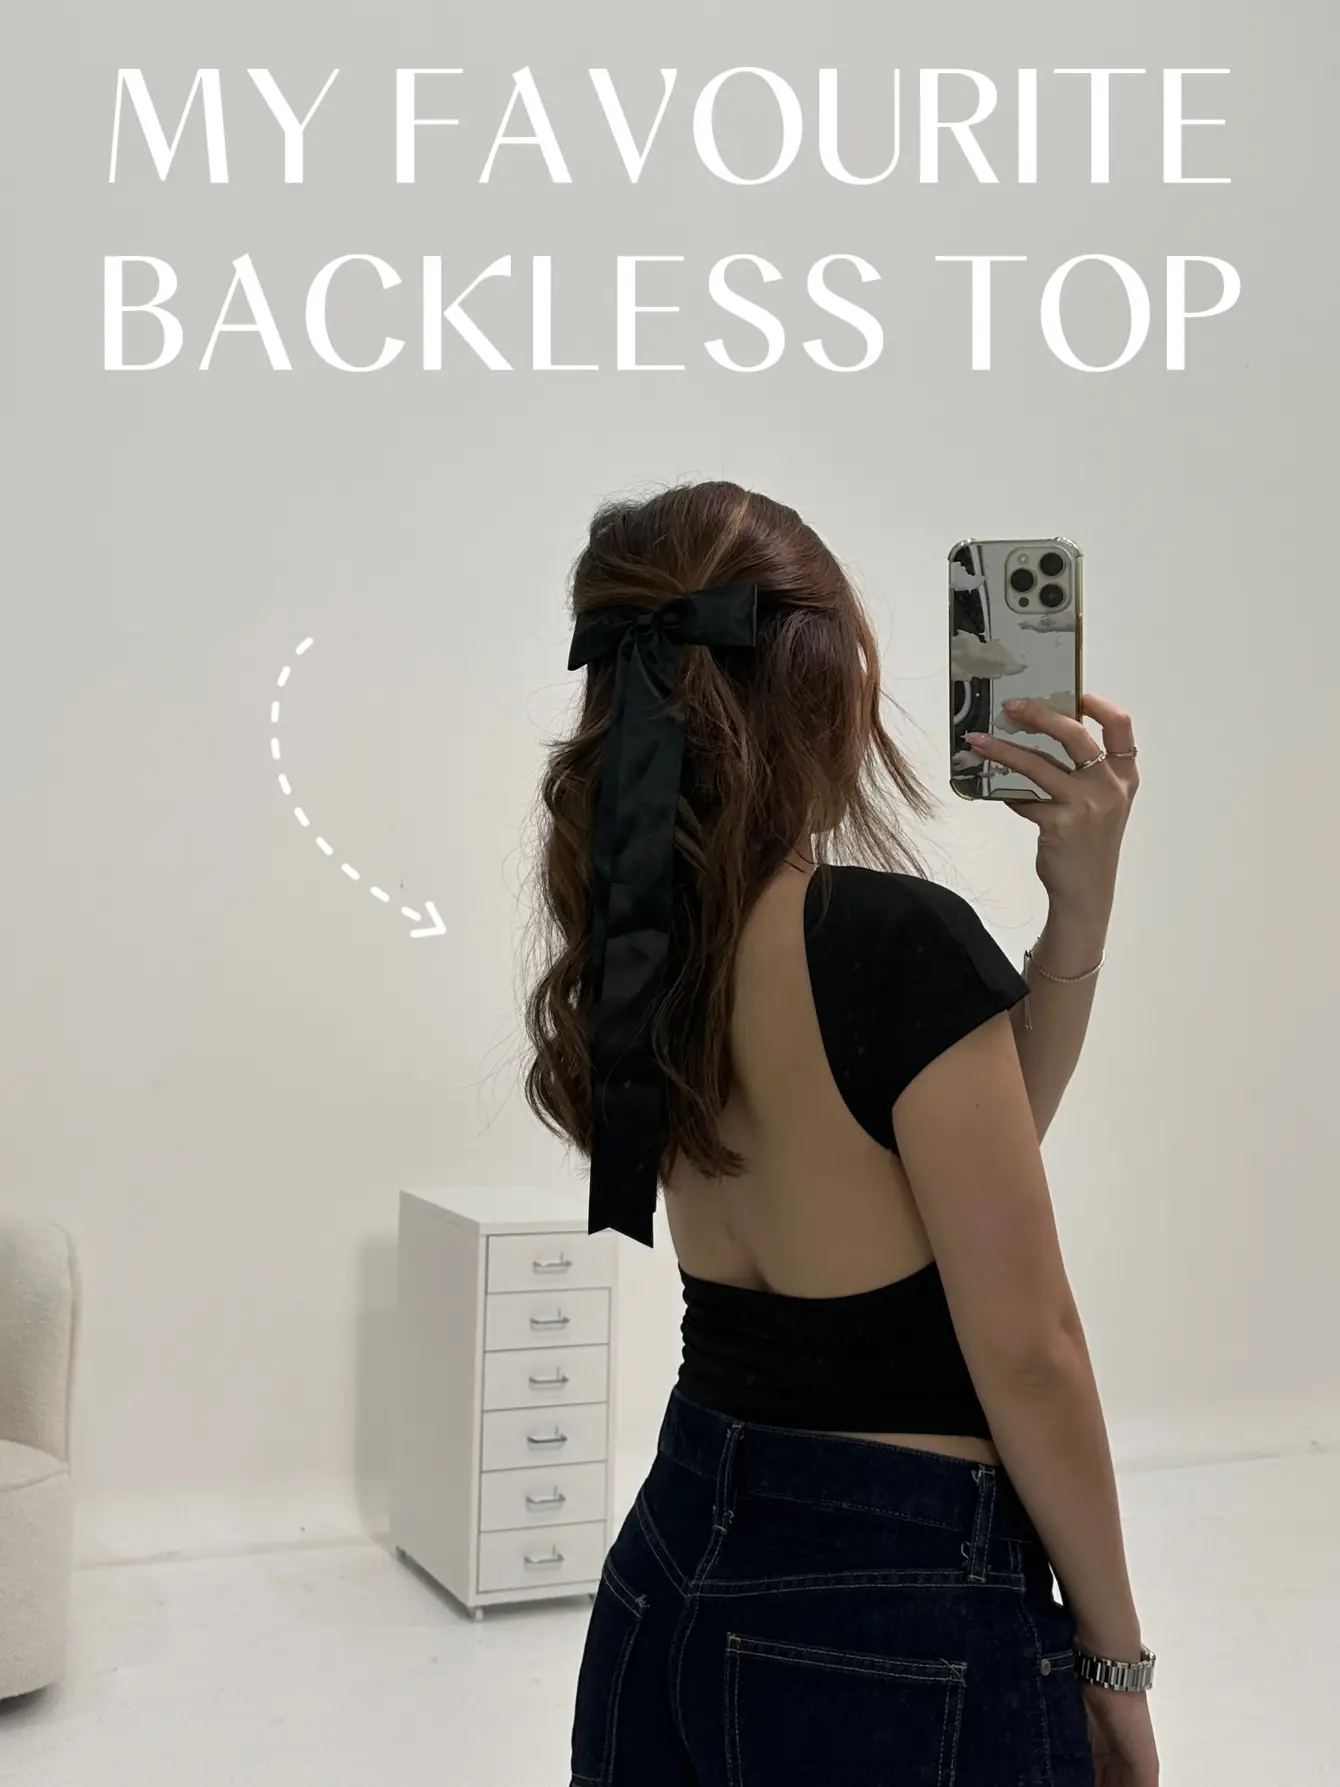 THE BEST $7 BACKLESS TOP 🖤, Gallery posted by Natasha Lee